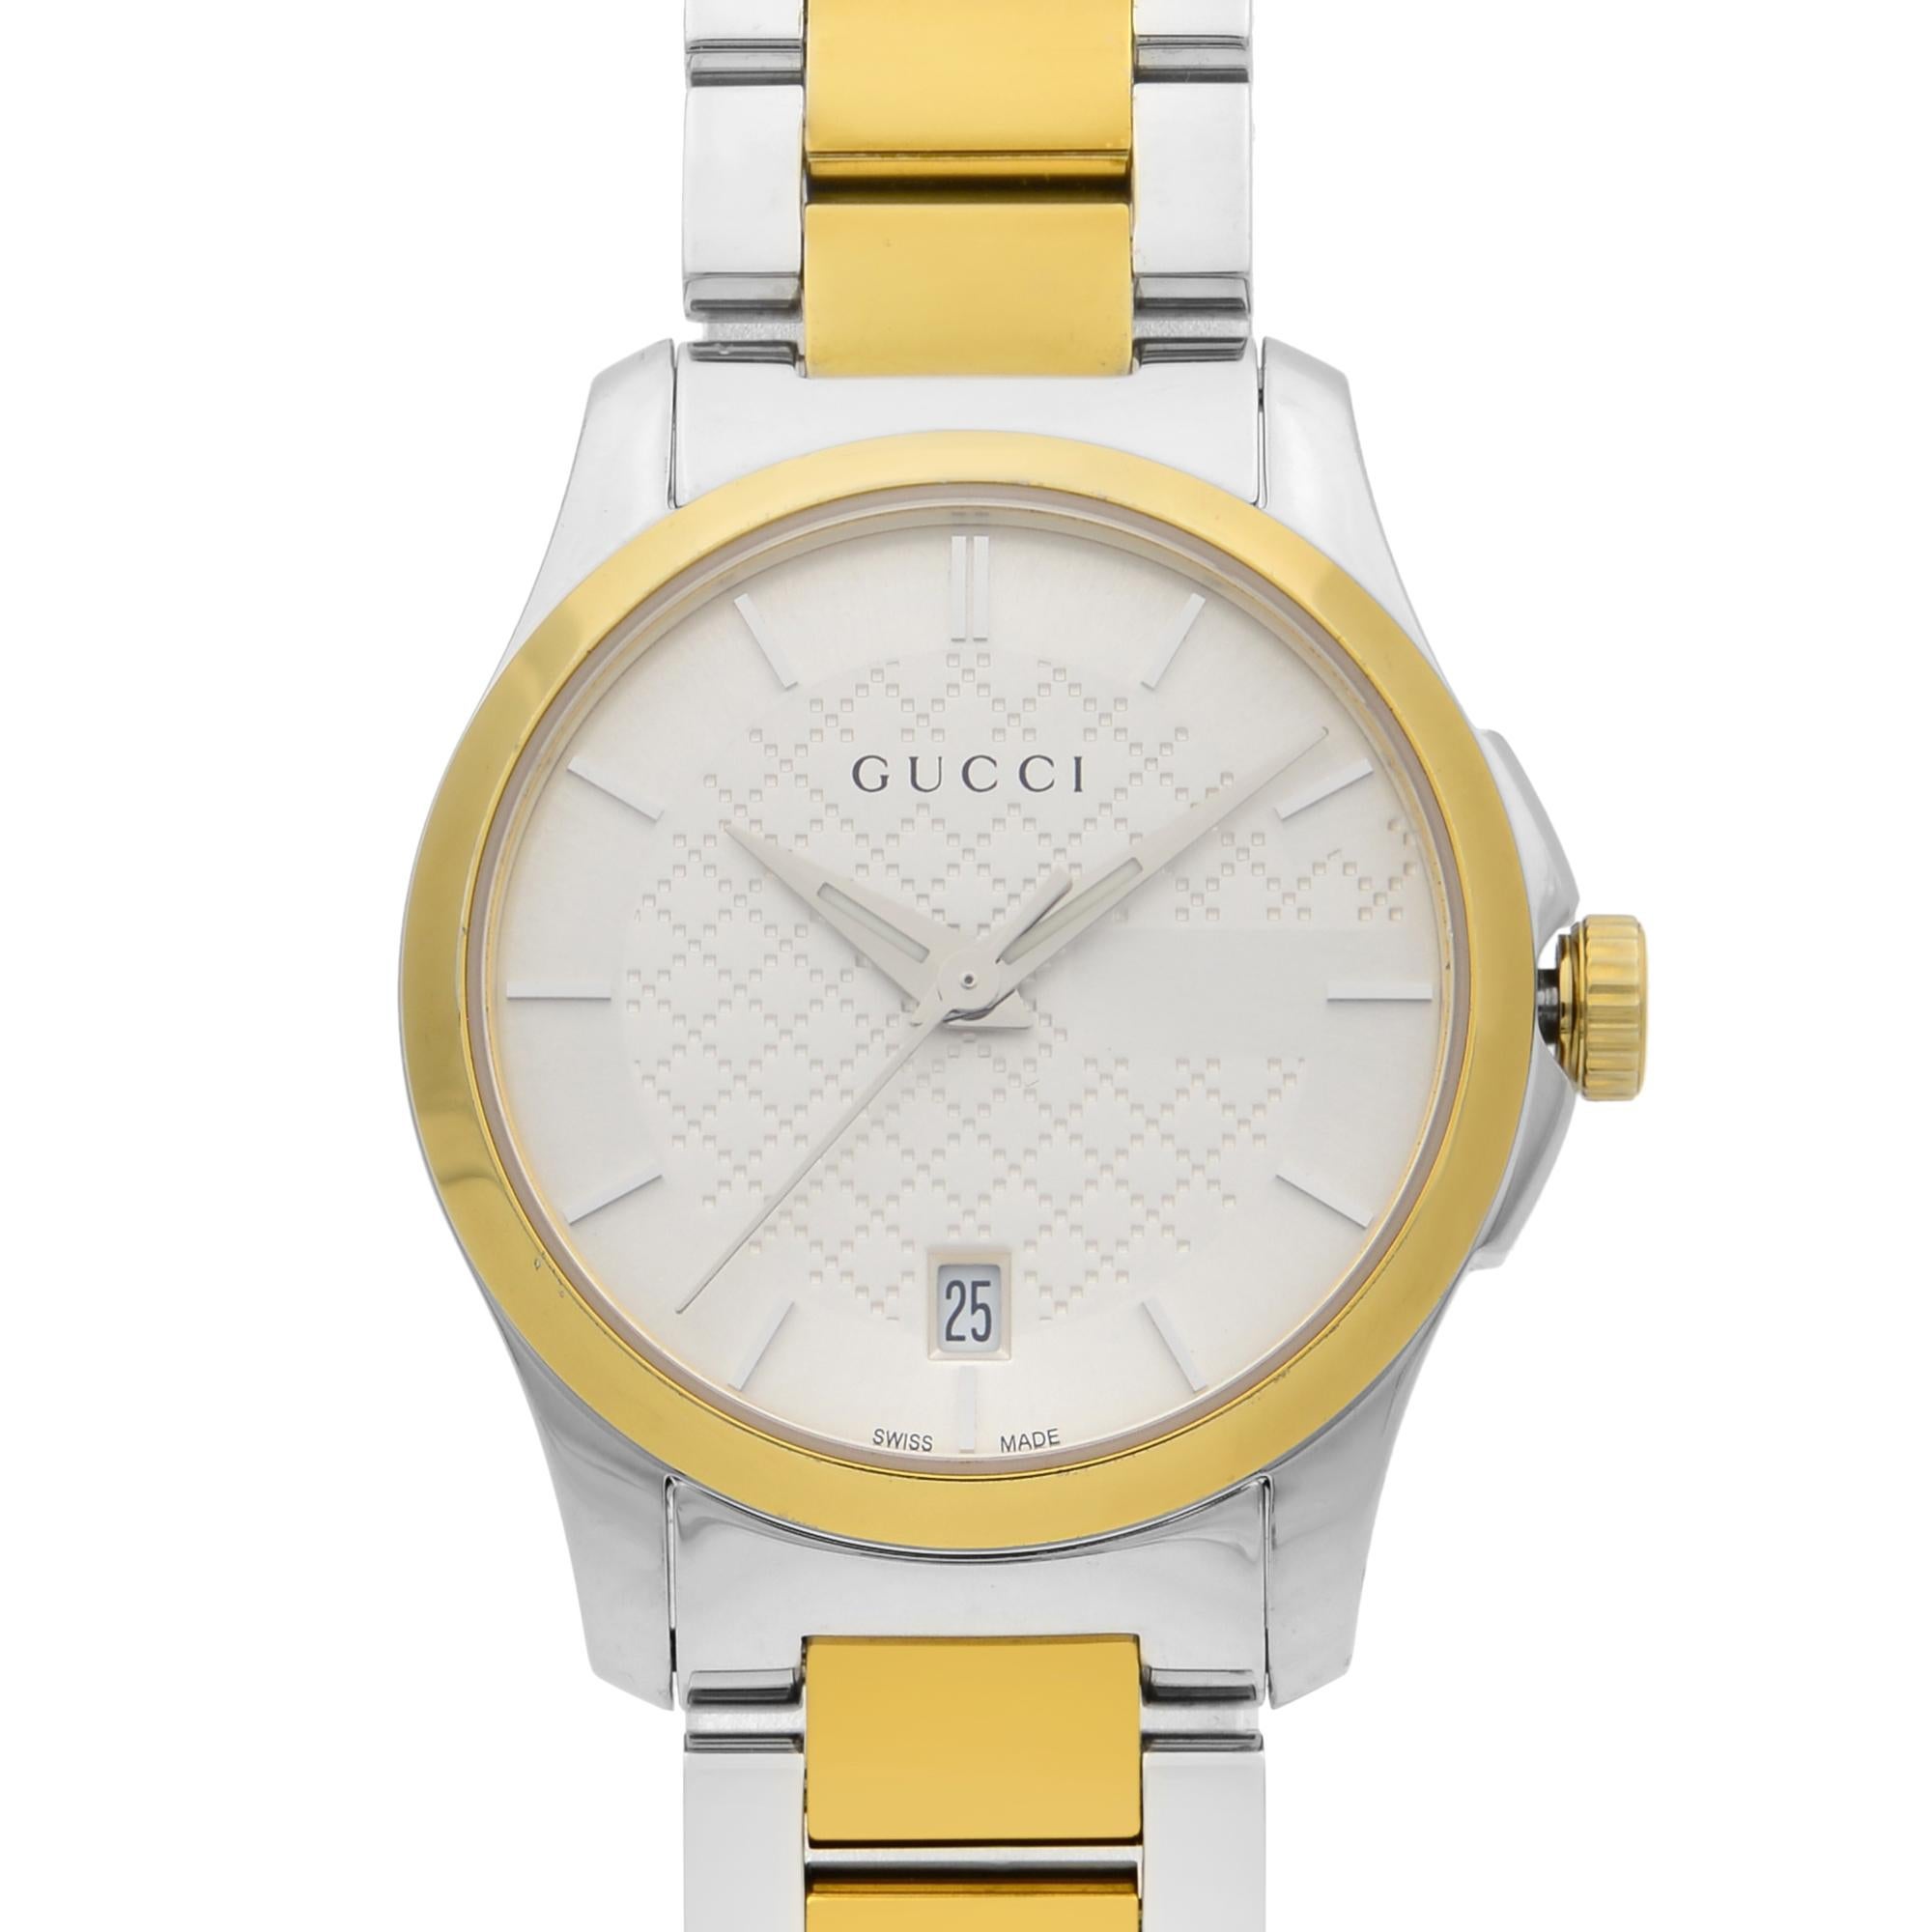 Pre-owned Gucci G-Timeless Stainless Steel Gold-Tone Silver Dial Ladies Watch YA126531. The Watch Only has Insignificant Hairline Scratches on the Bracelet. No Original Box and Papers are Included. Comes with Chronostore Box And Authenticity Card.